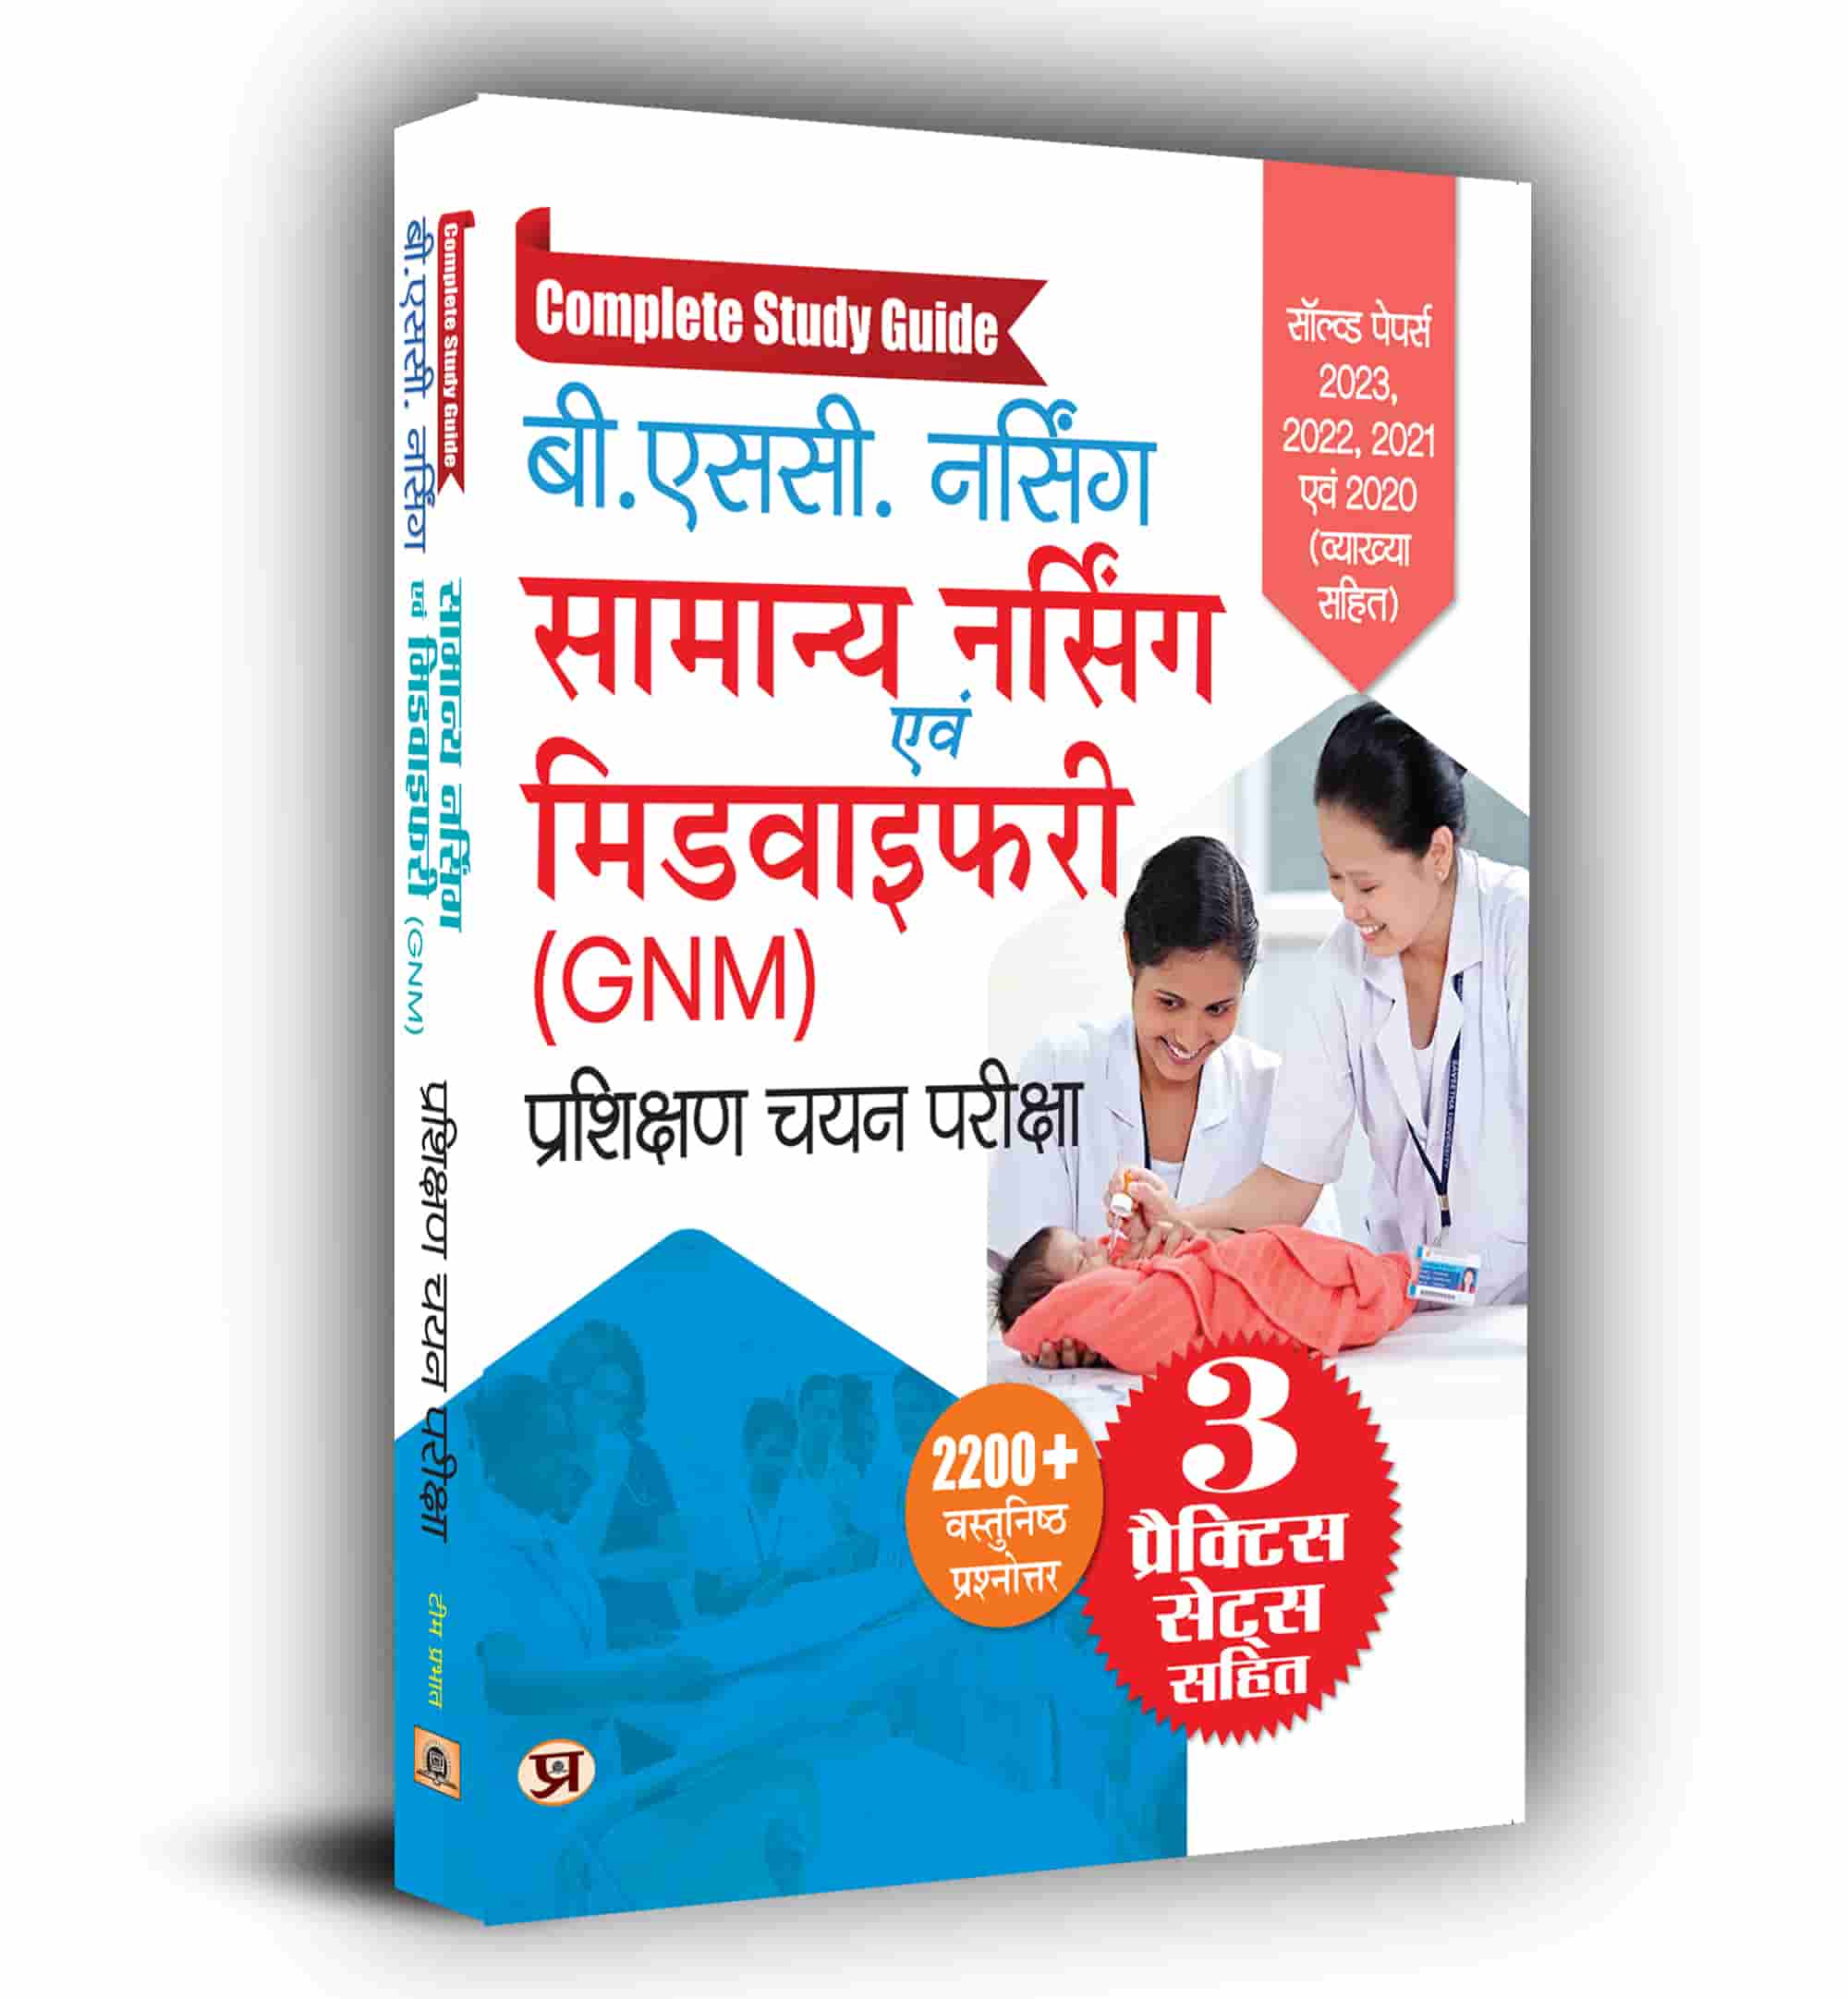 B.Sc Nursing General Nursing and Midwifery (GNM) Training Selection Examination 2023 Guide with Practice Sets in Hindi